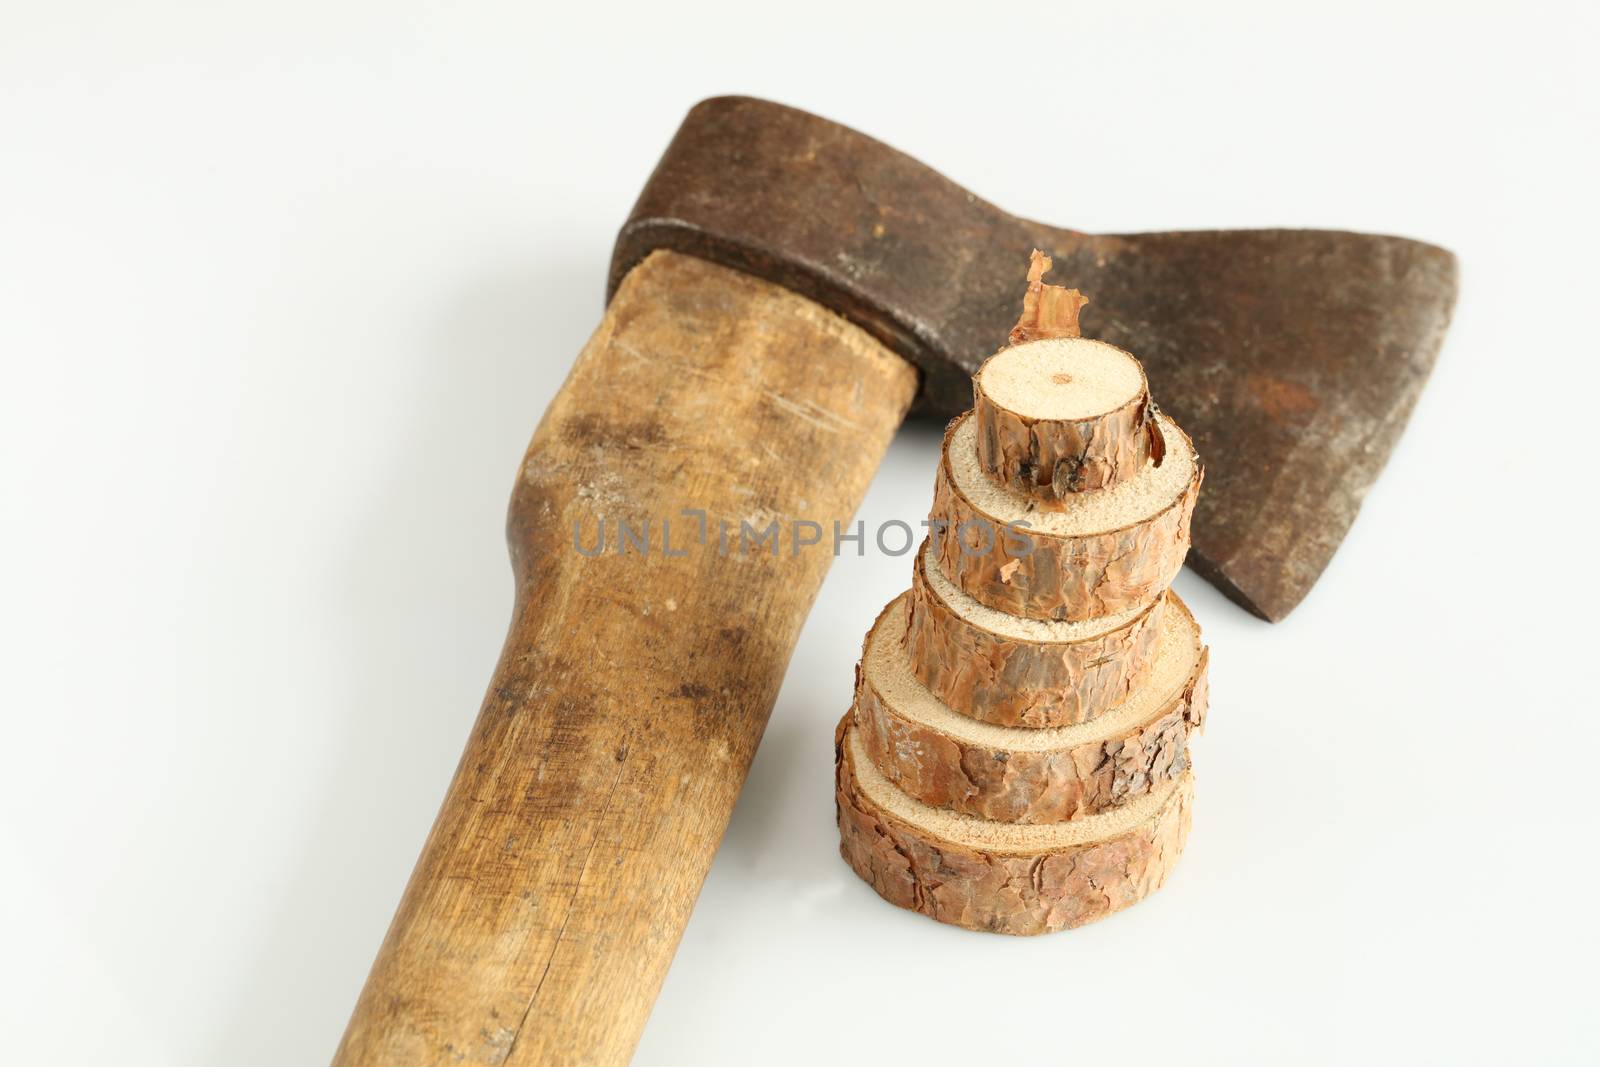 Three rings of a section of a tree trunk against a background of an old ax against a white background